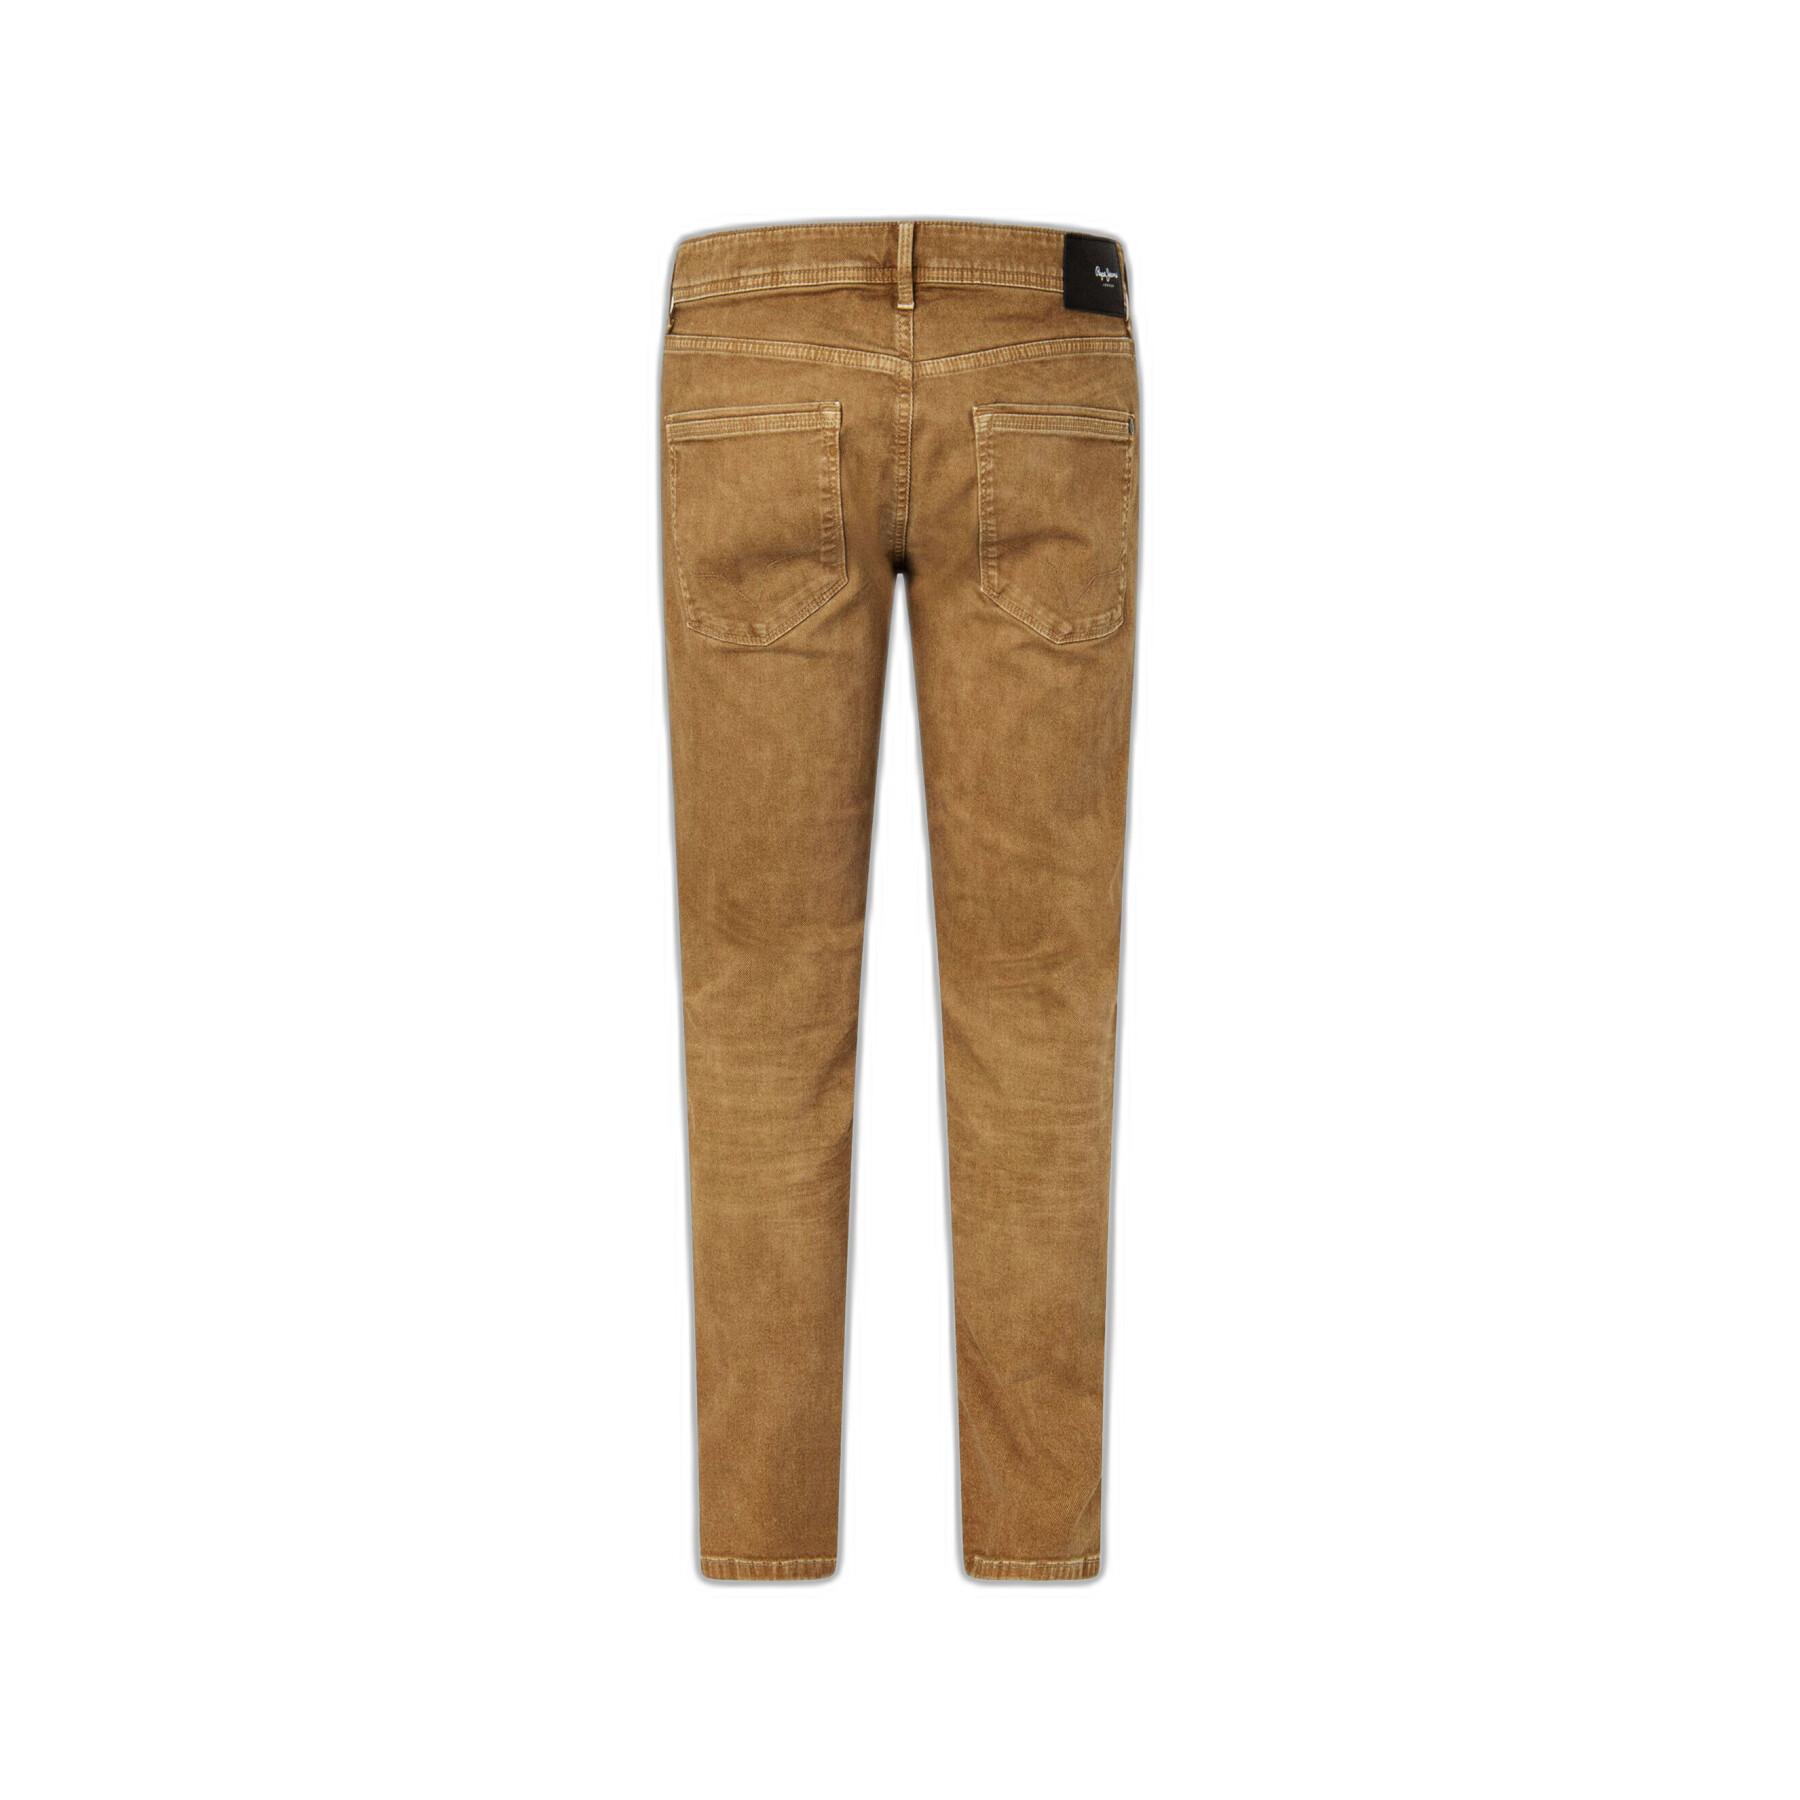 Velvet pants Pepe Jeans Alban Cord - Trousers and Jogging - Clothing - Men